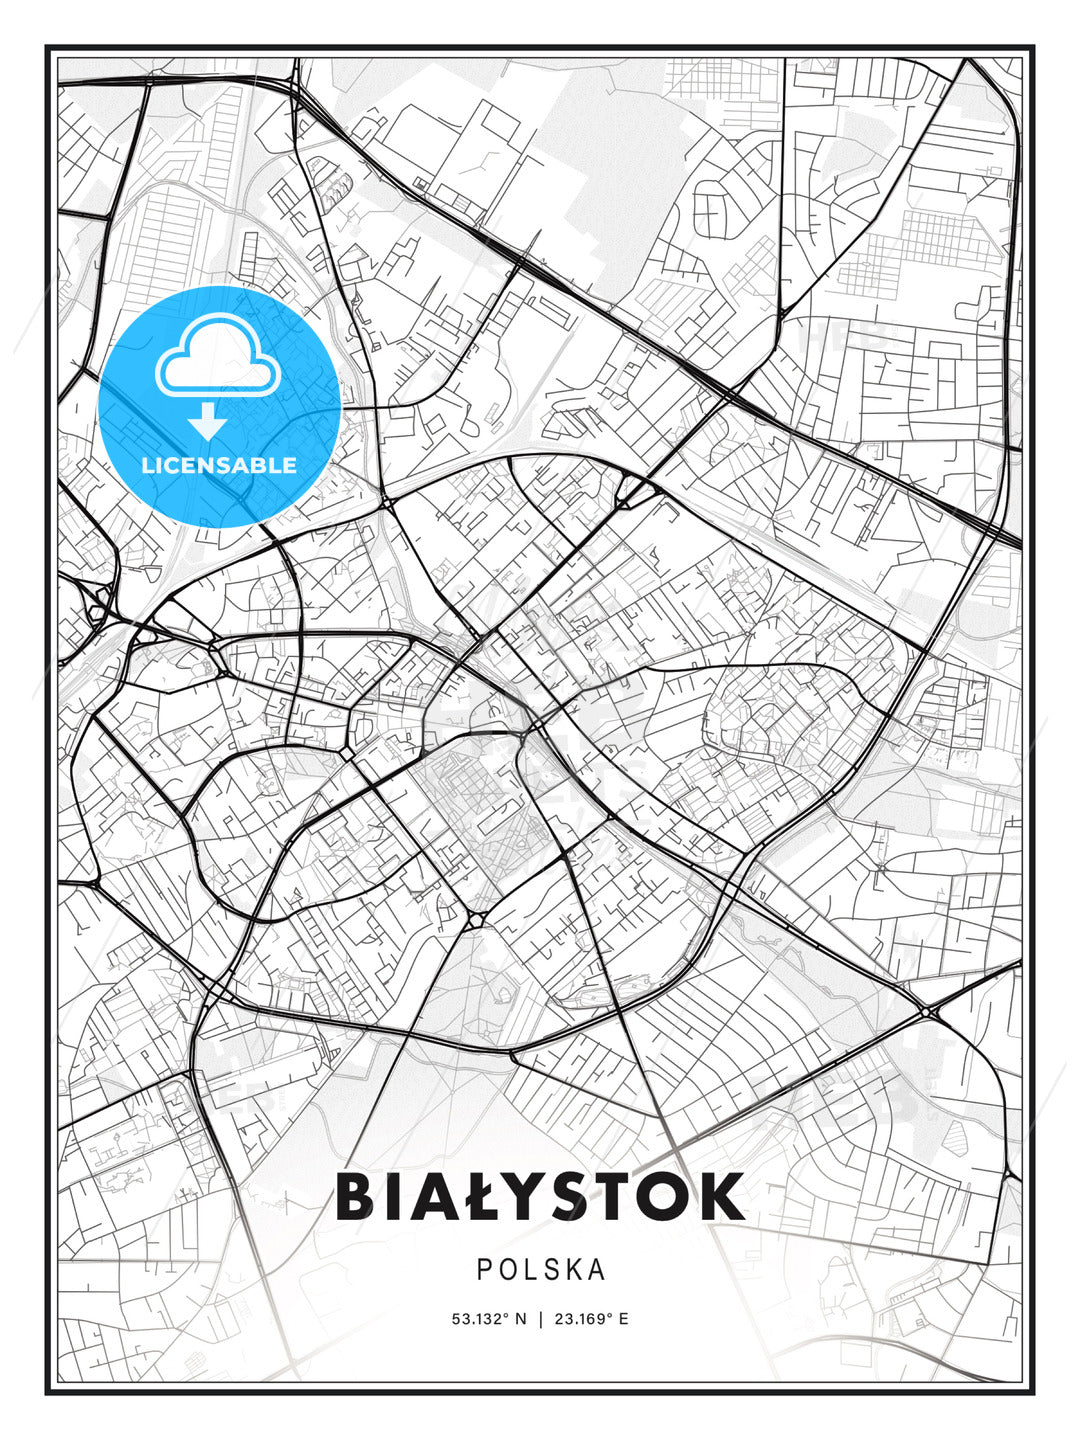 Białystok, Poland, Modern Print Template in Various Formats - HEBSTREITS Sketches